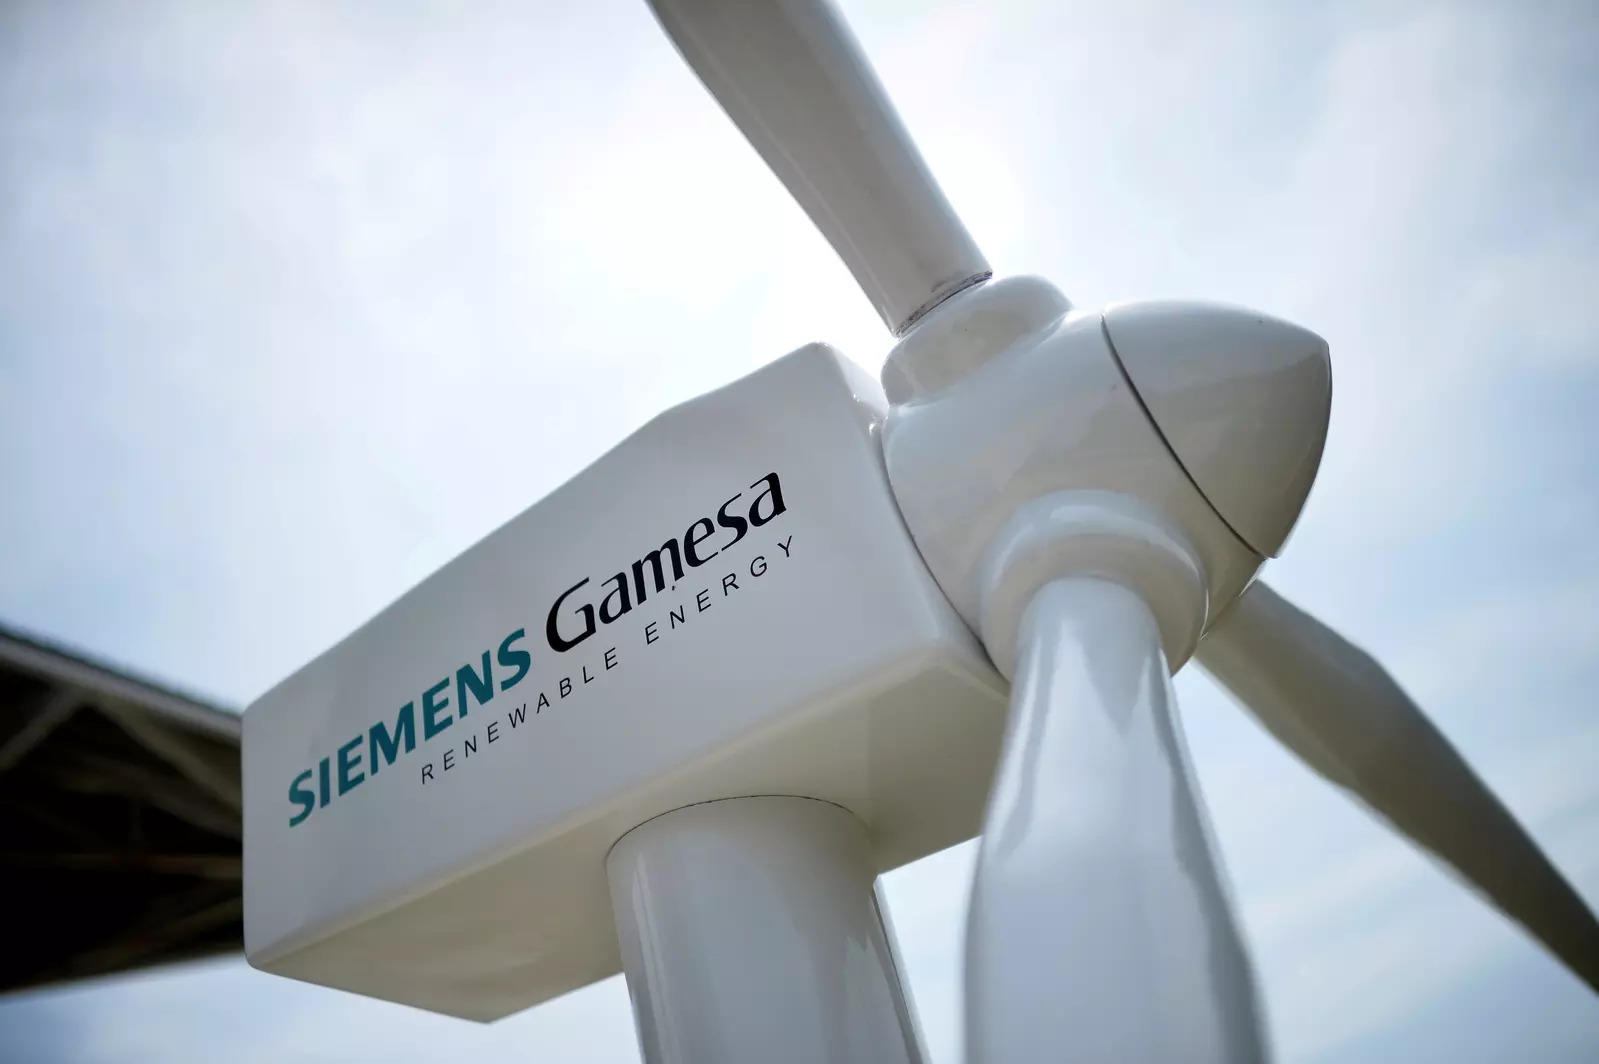 A model of a wind turbine with the Siemens Gamesa logo is displayed outside the annual general shareholders meeting in Zamudio, Spain, June 20, 2017. REUTERS/Vincent West/File Photo